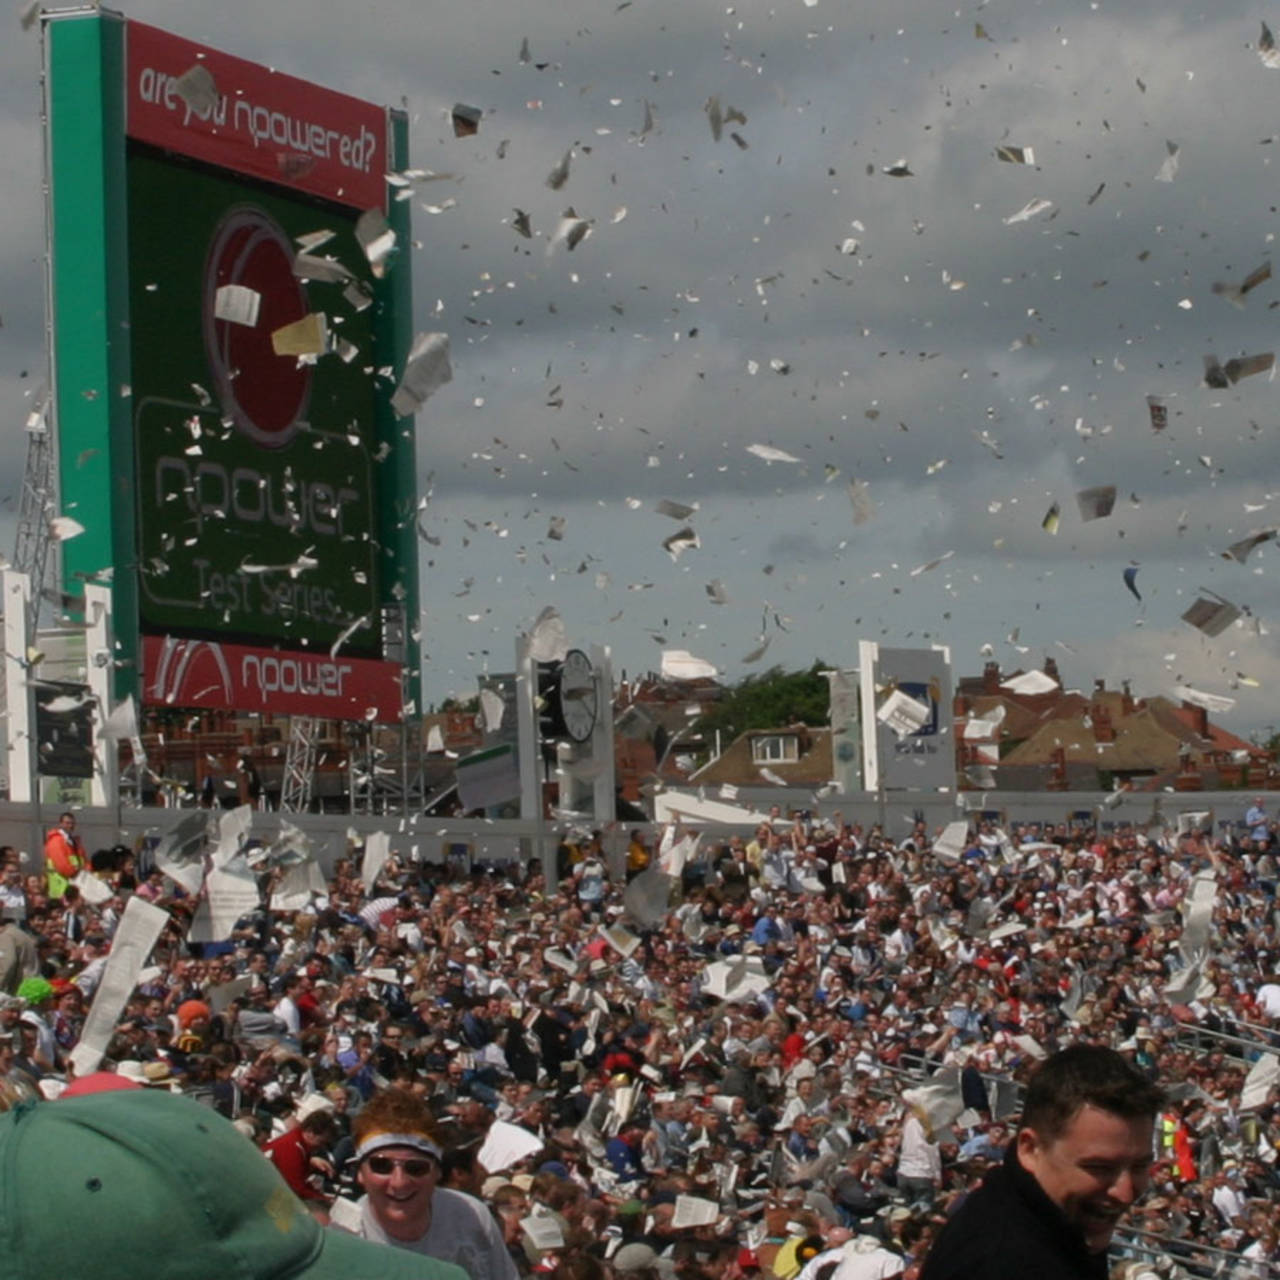 A confetti shower in the crowd, England v New Zealand, 2nd Investec Test, Headingley, 2nd day, May 25, 2013